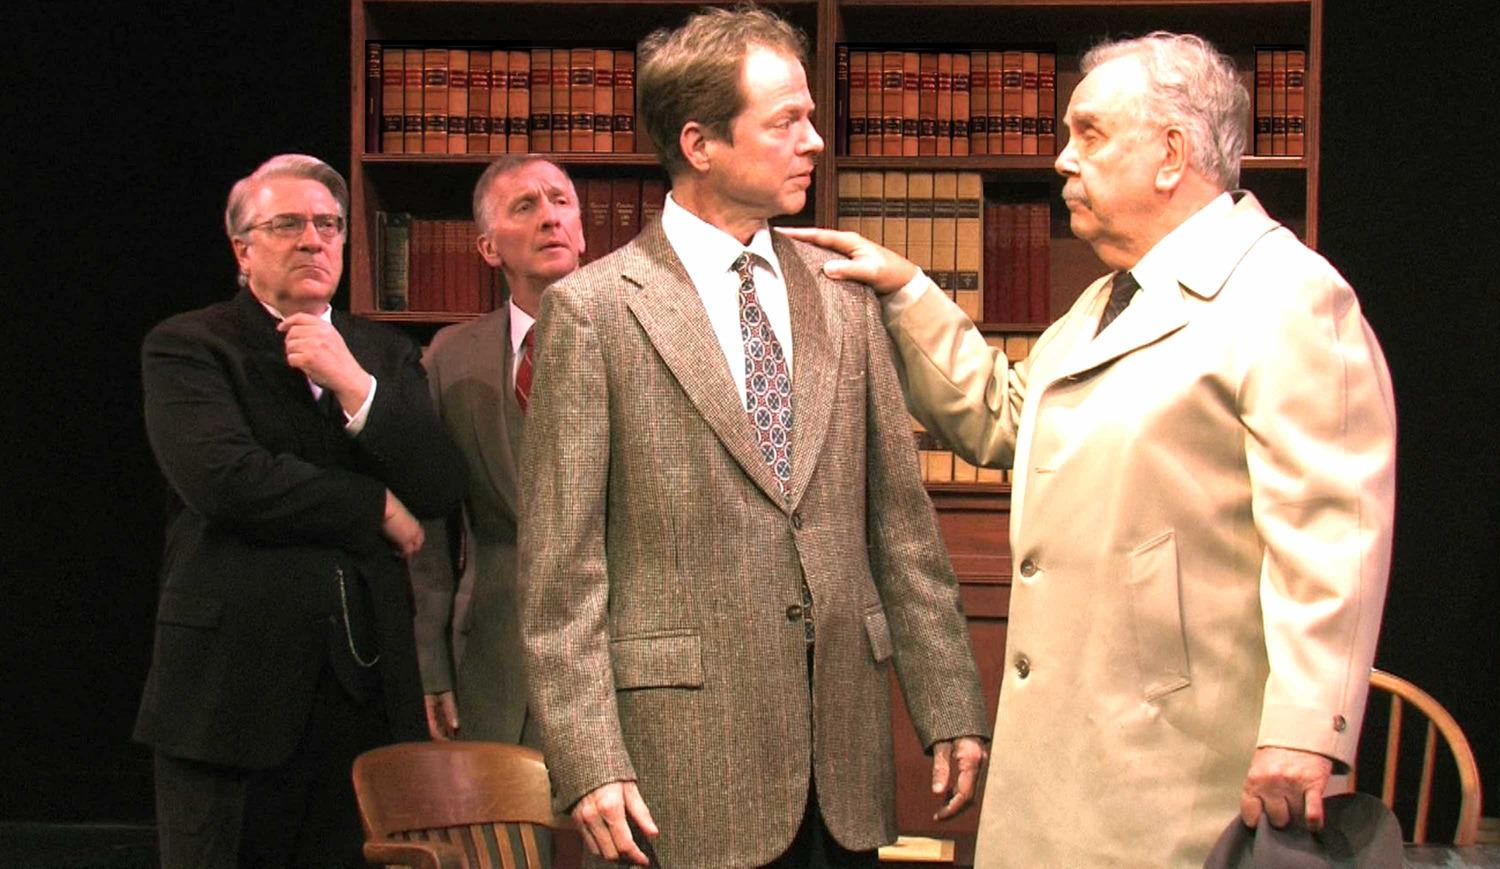 Barry Hatrick, David Victor, Travis Branch and David Pirrie in the Westport Community Theatre’s production of Agatha Christie’s Witness for the Prosecution.
1